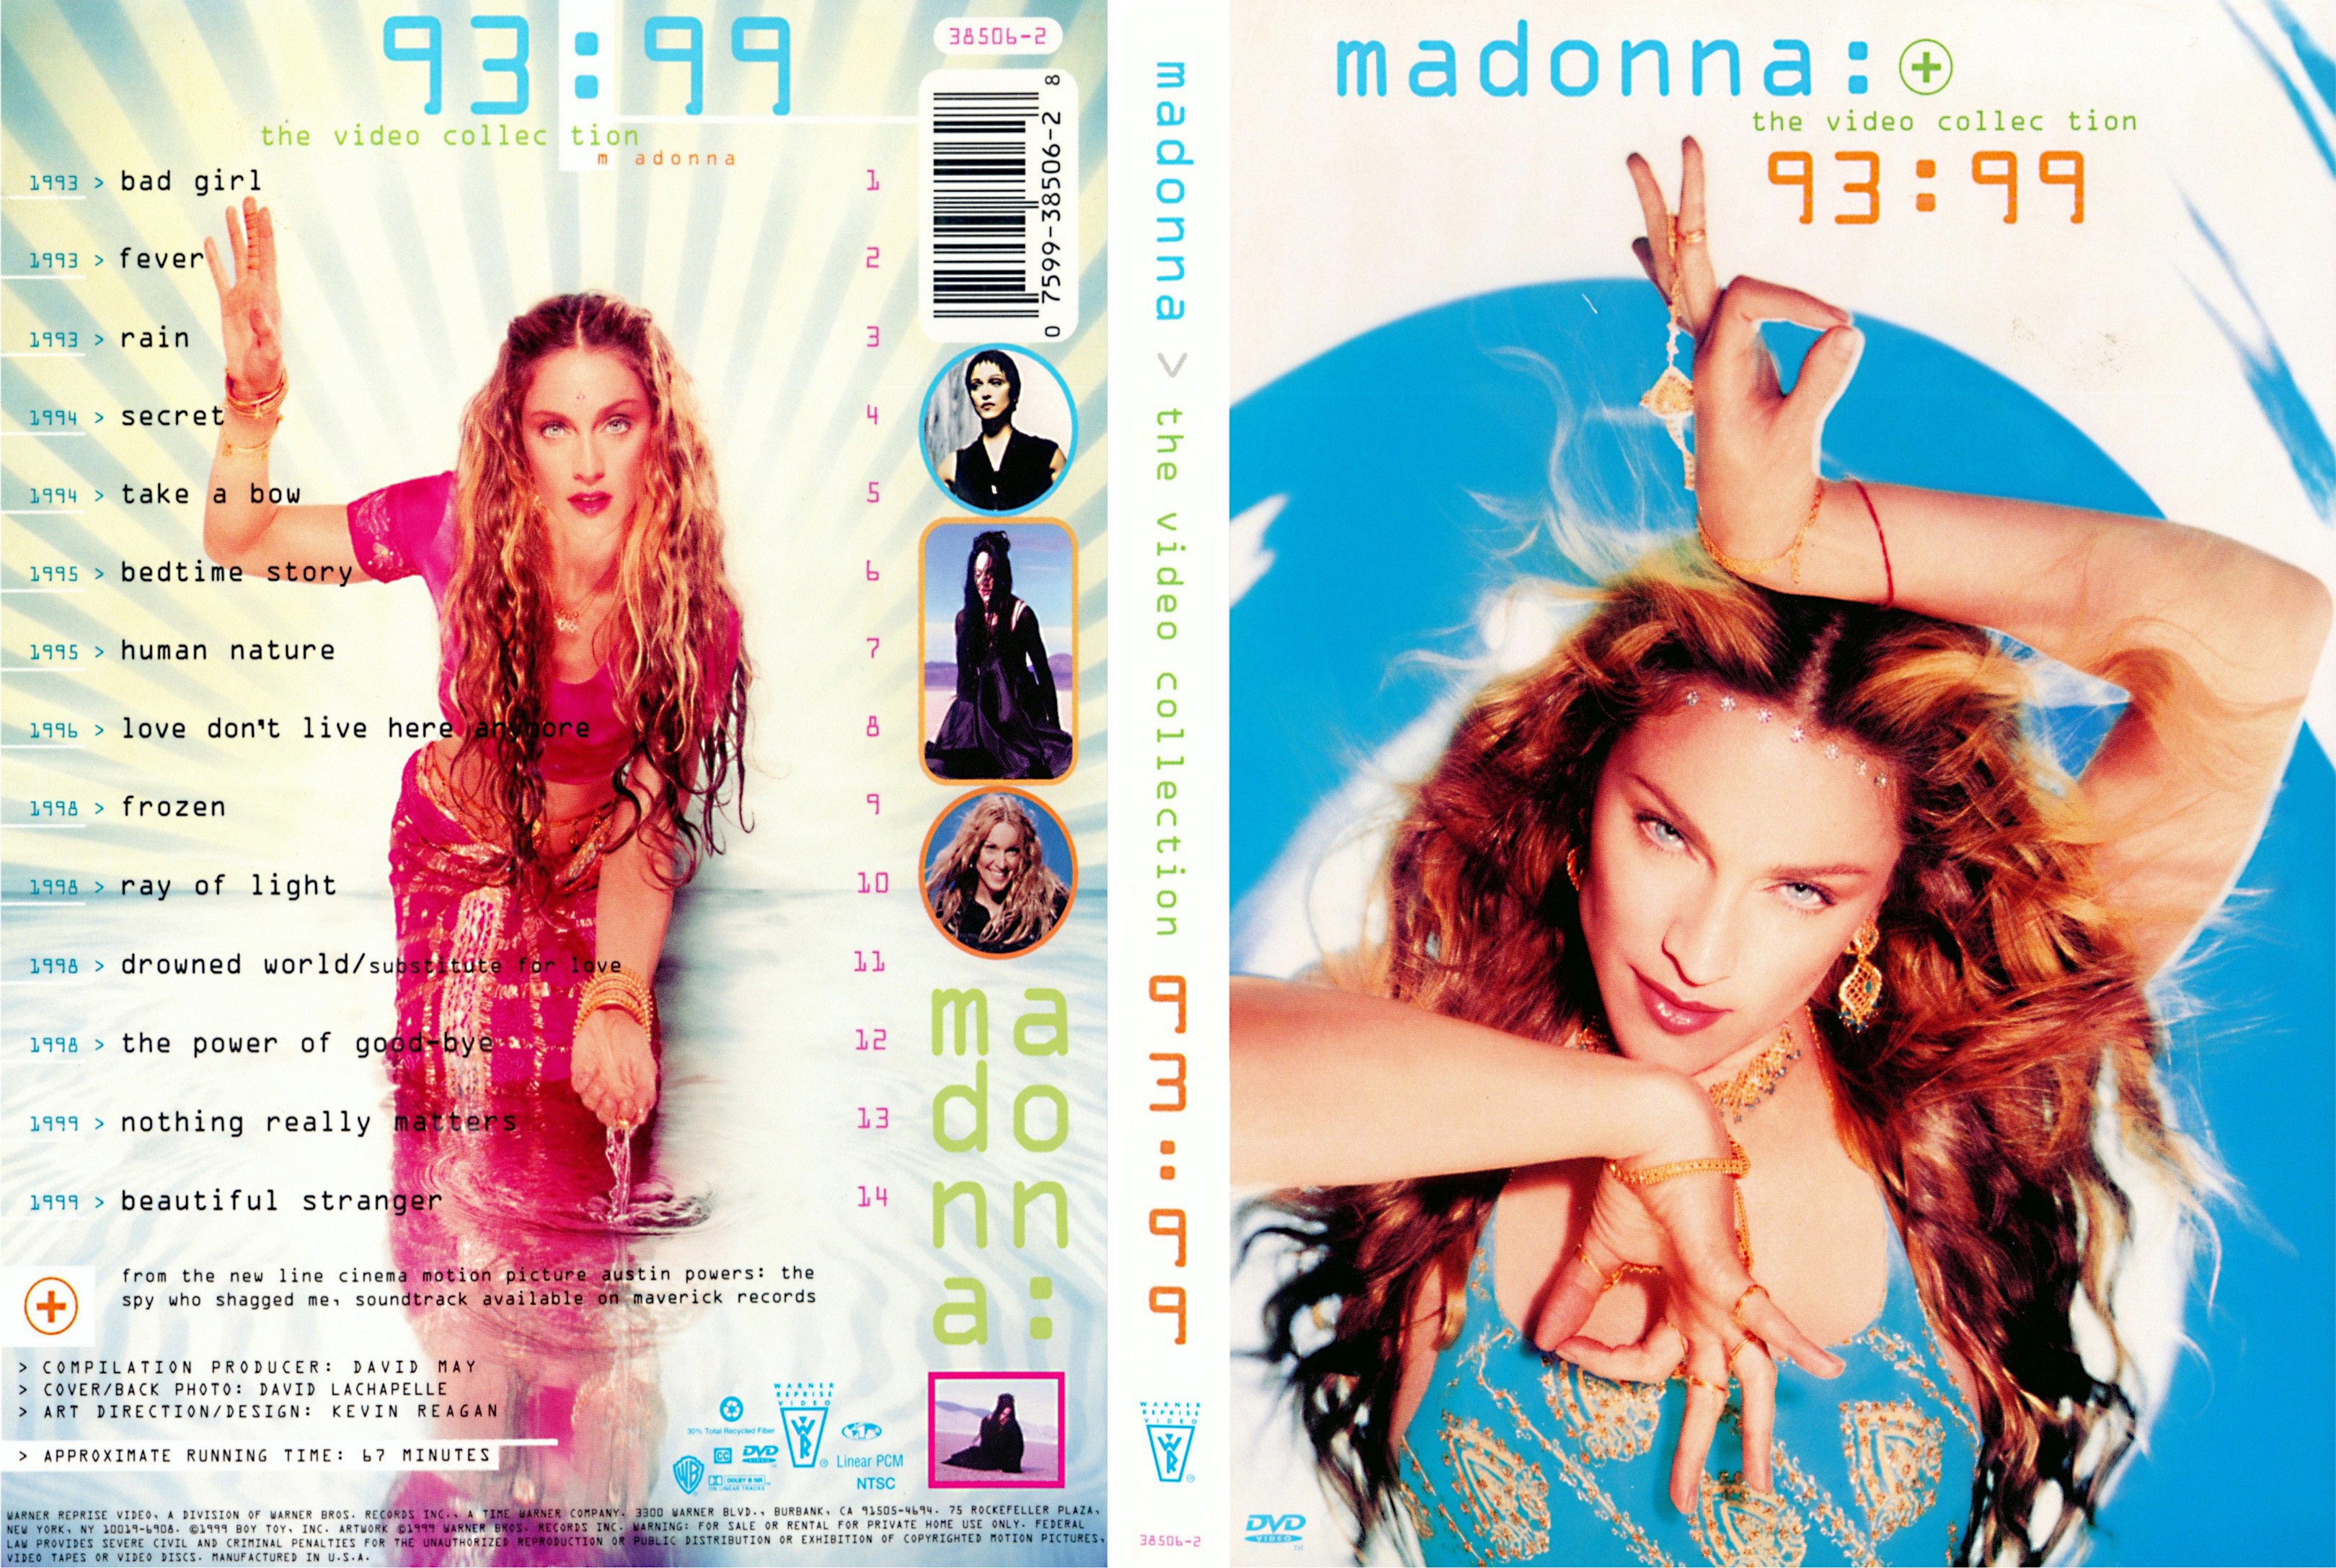 Jaquette DVD Madonna The video collection 93-99